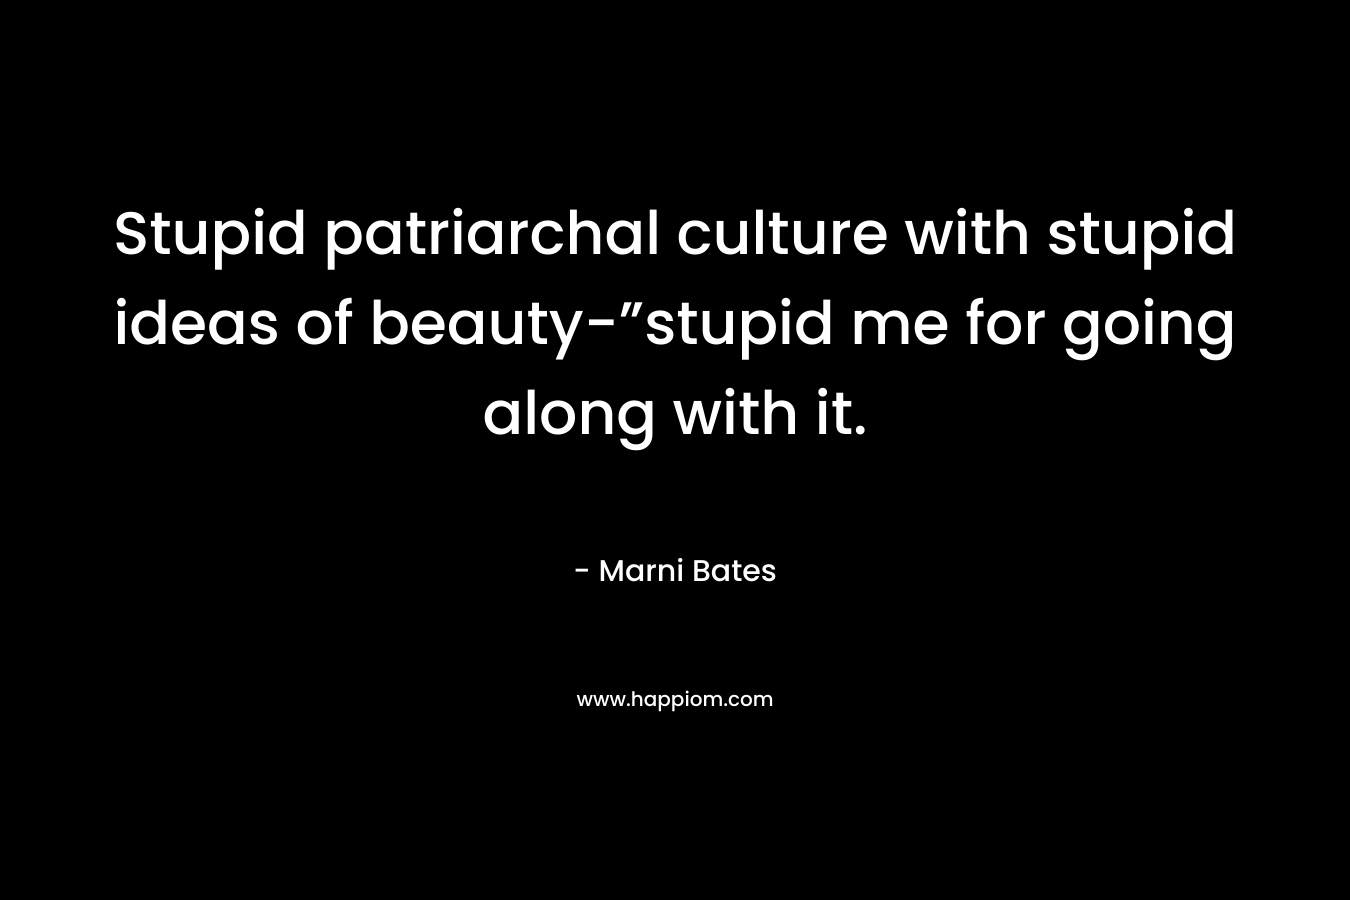 Stupid patriarchal culture with stupid ideas of beauty-”stupid me for going along with it.